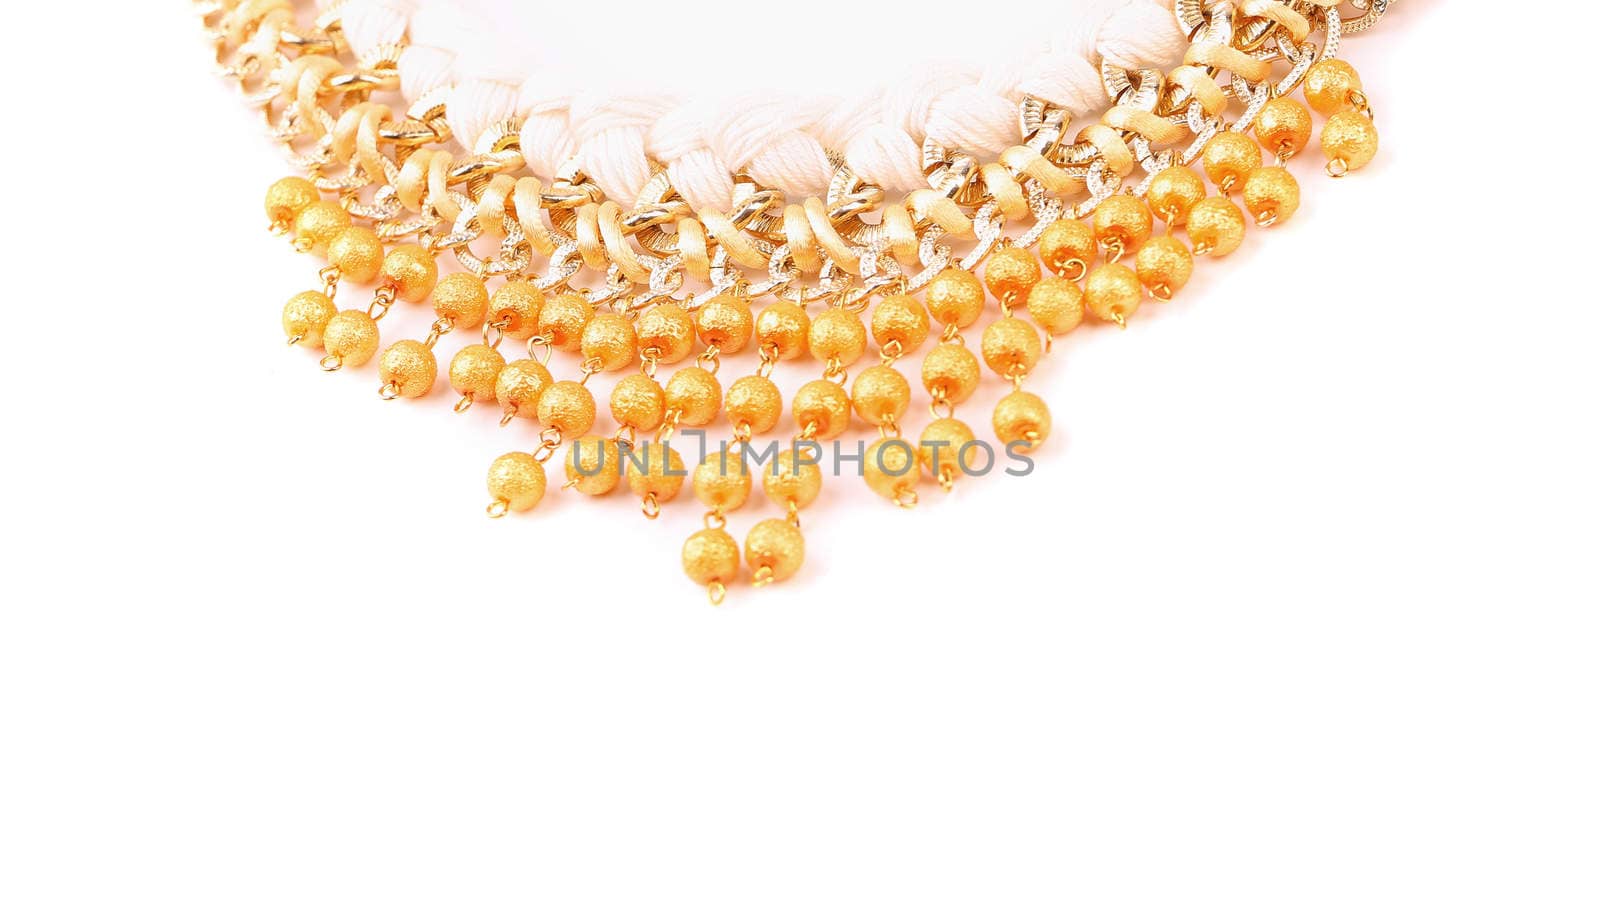 necklace of gold pearls on a white bacground